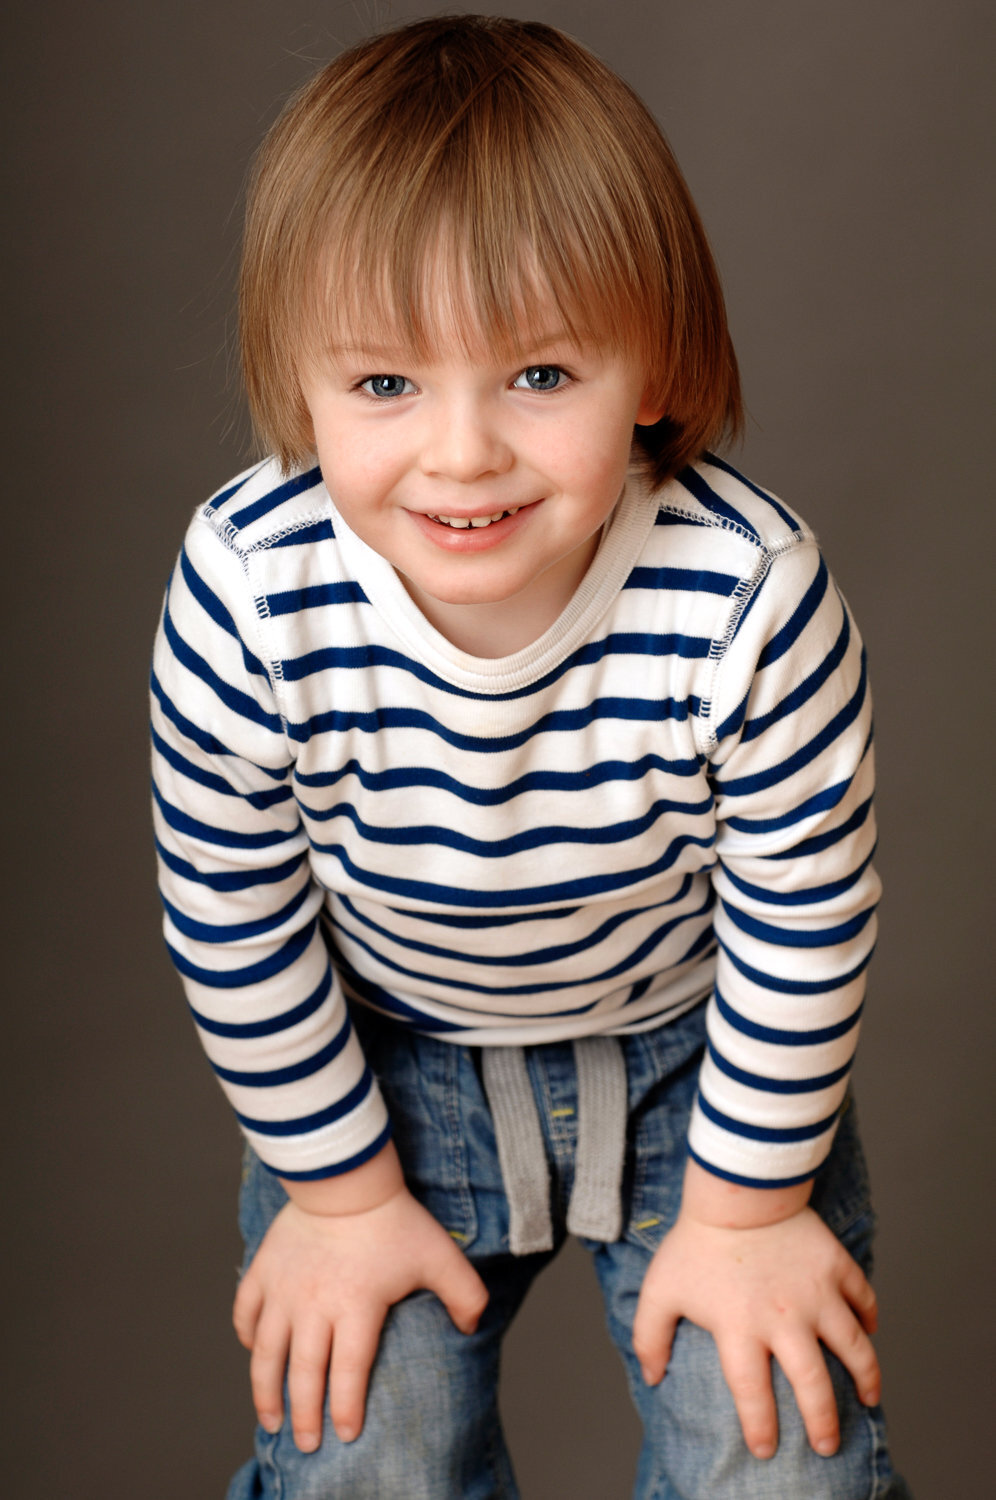 toddler boy with brown hair, wearing top with stripes and jeans smiling